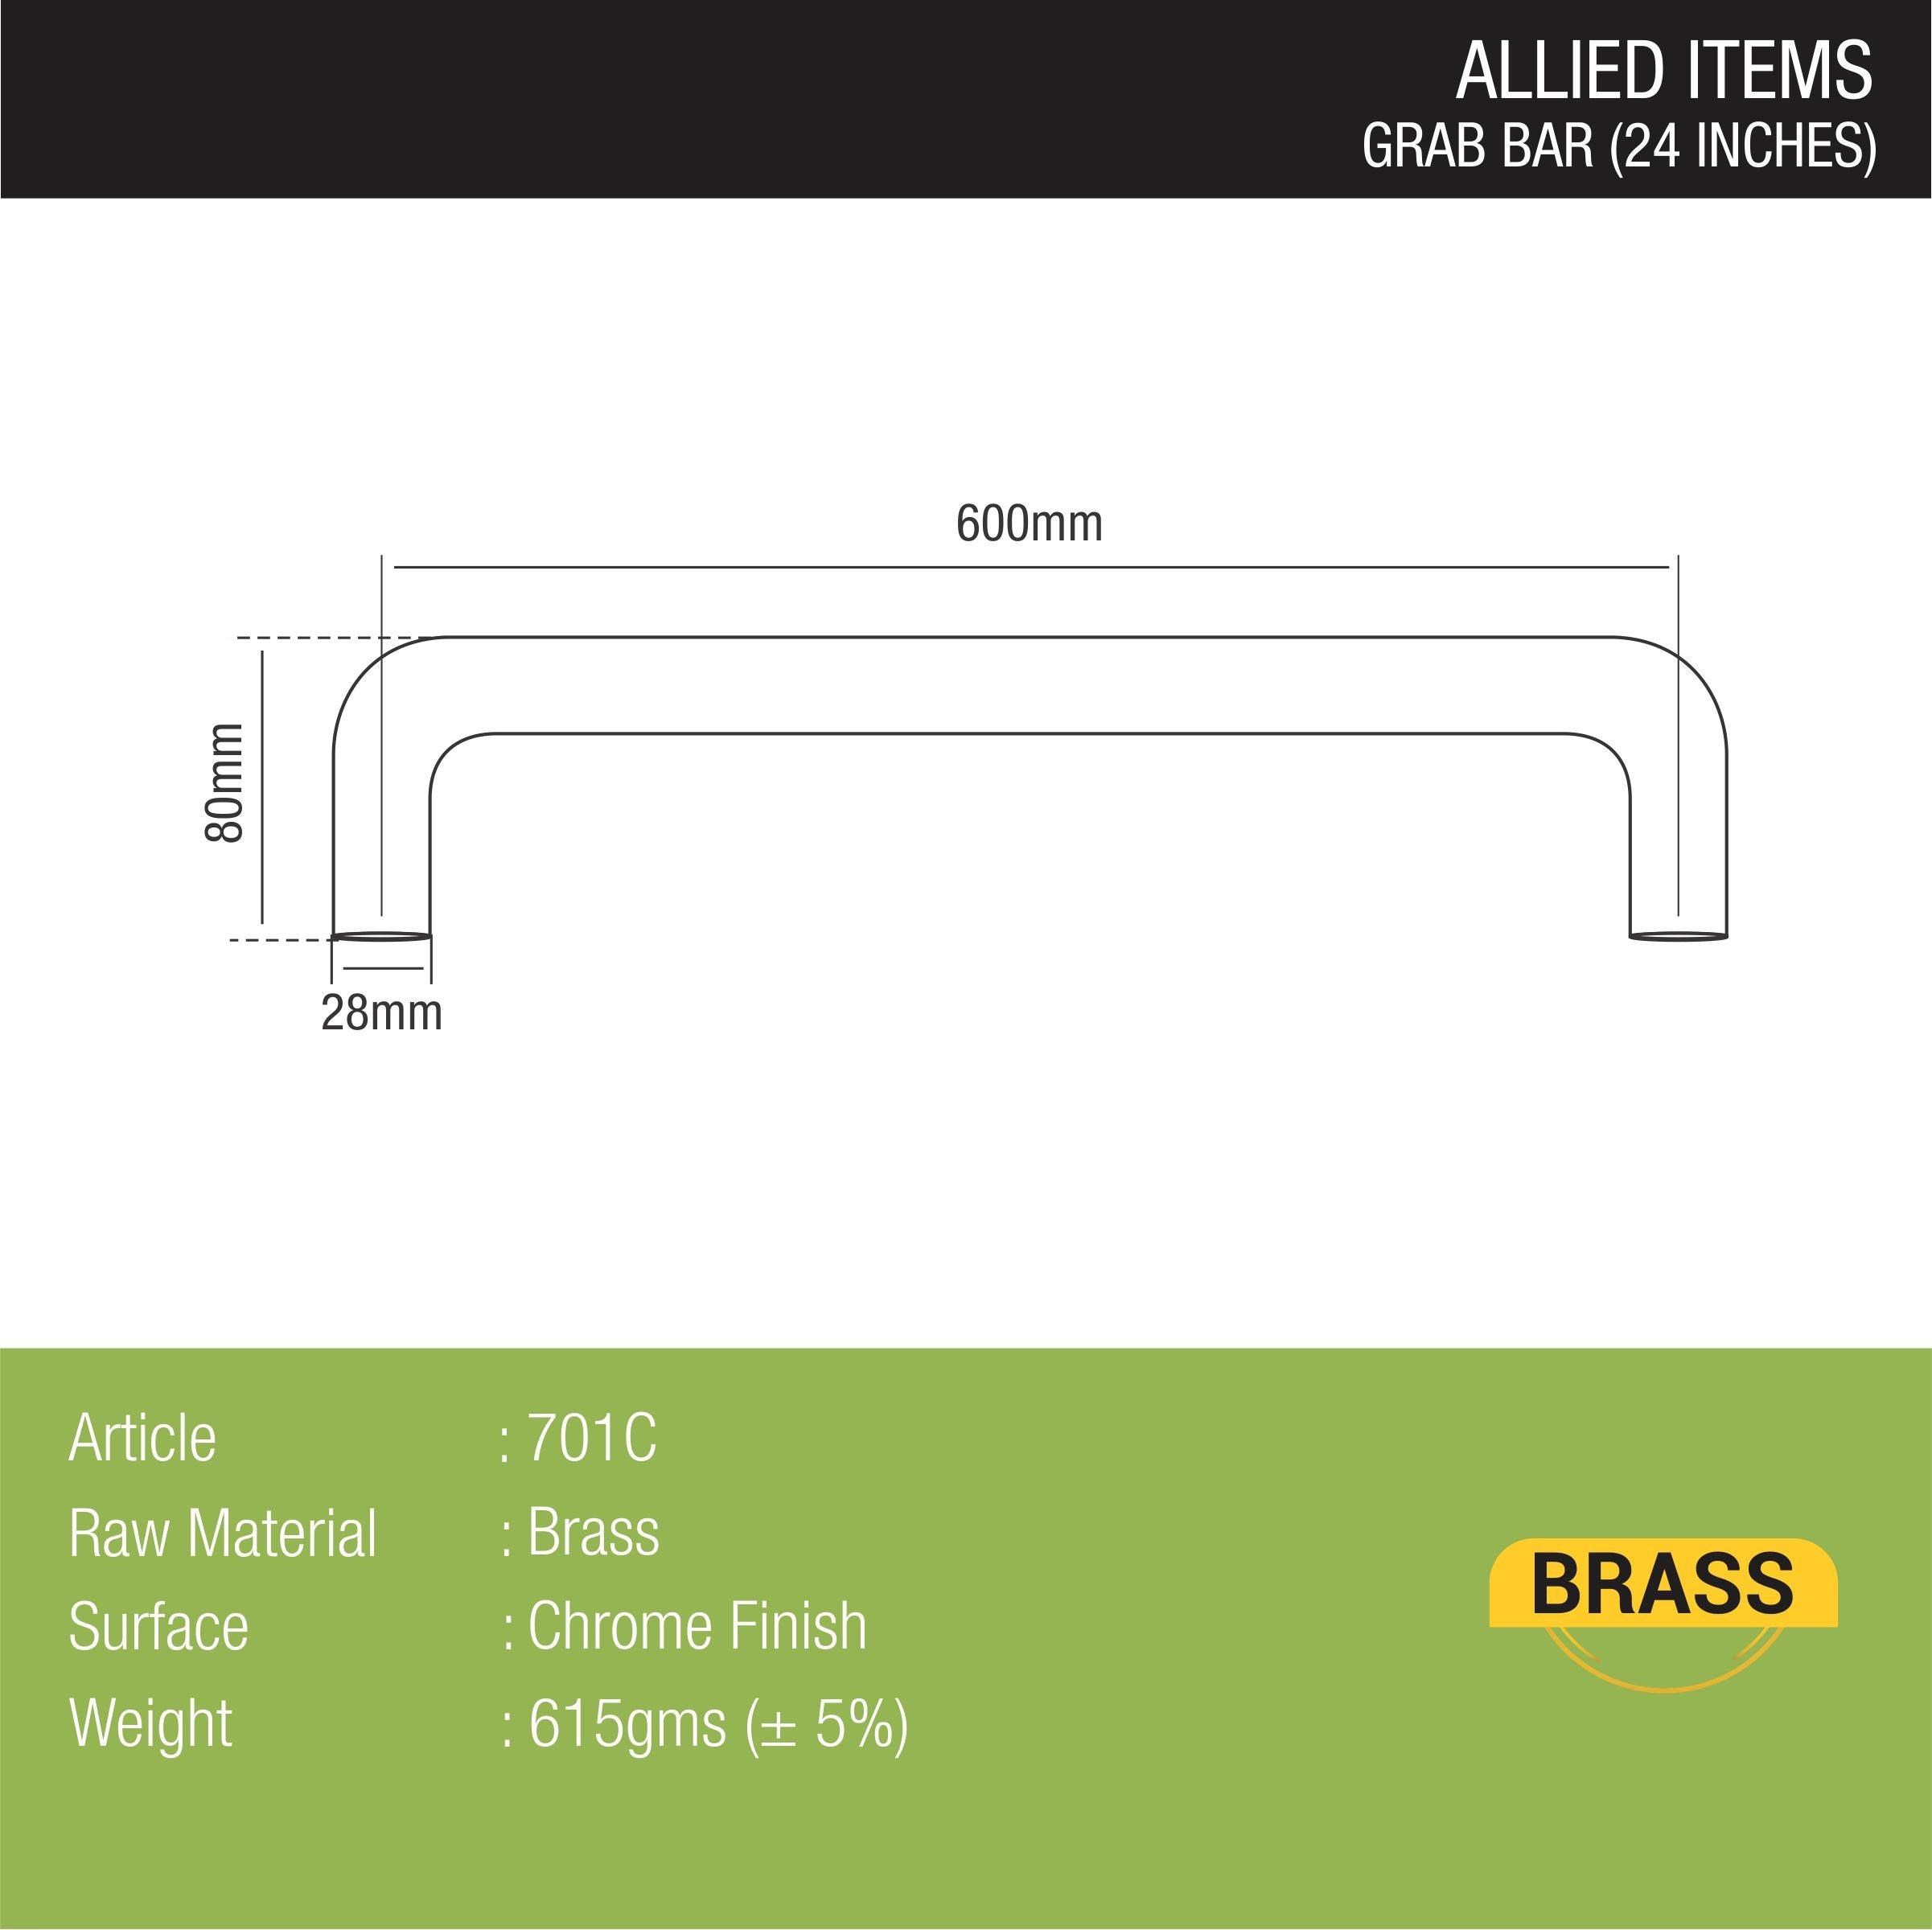 Brass Grab Bar (24 Inches) sizes and dimensions